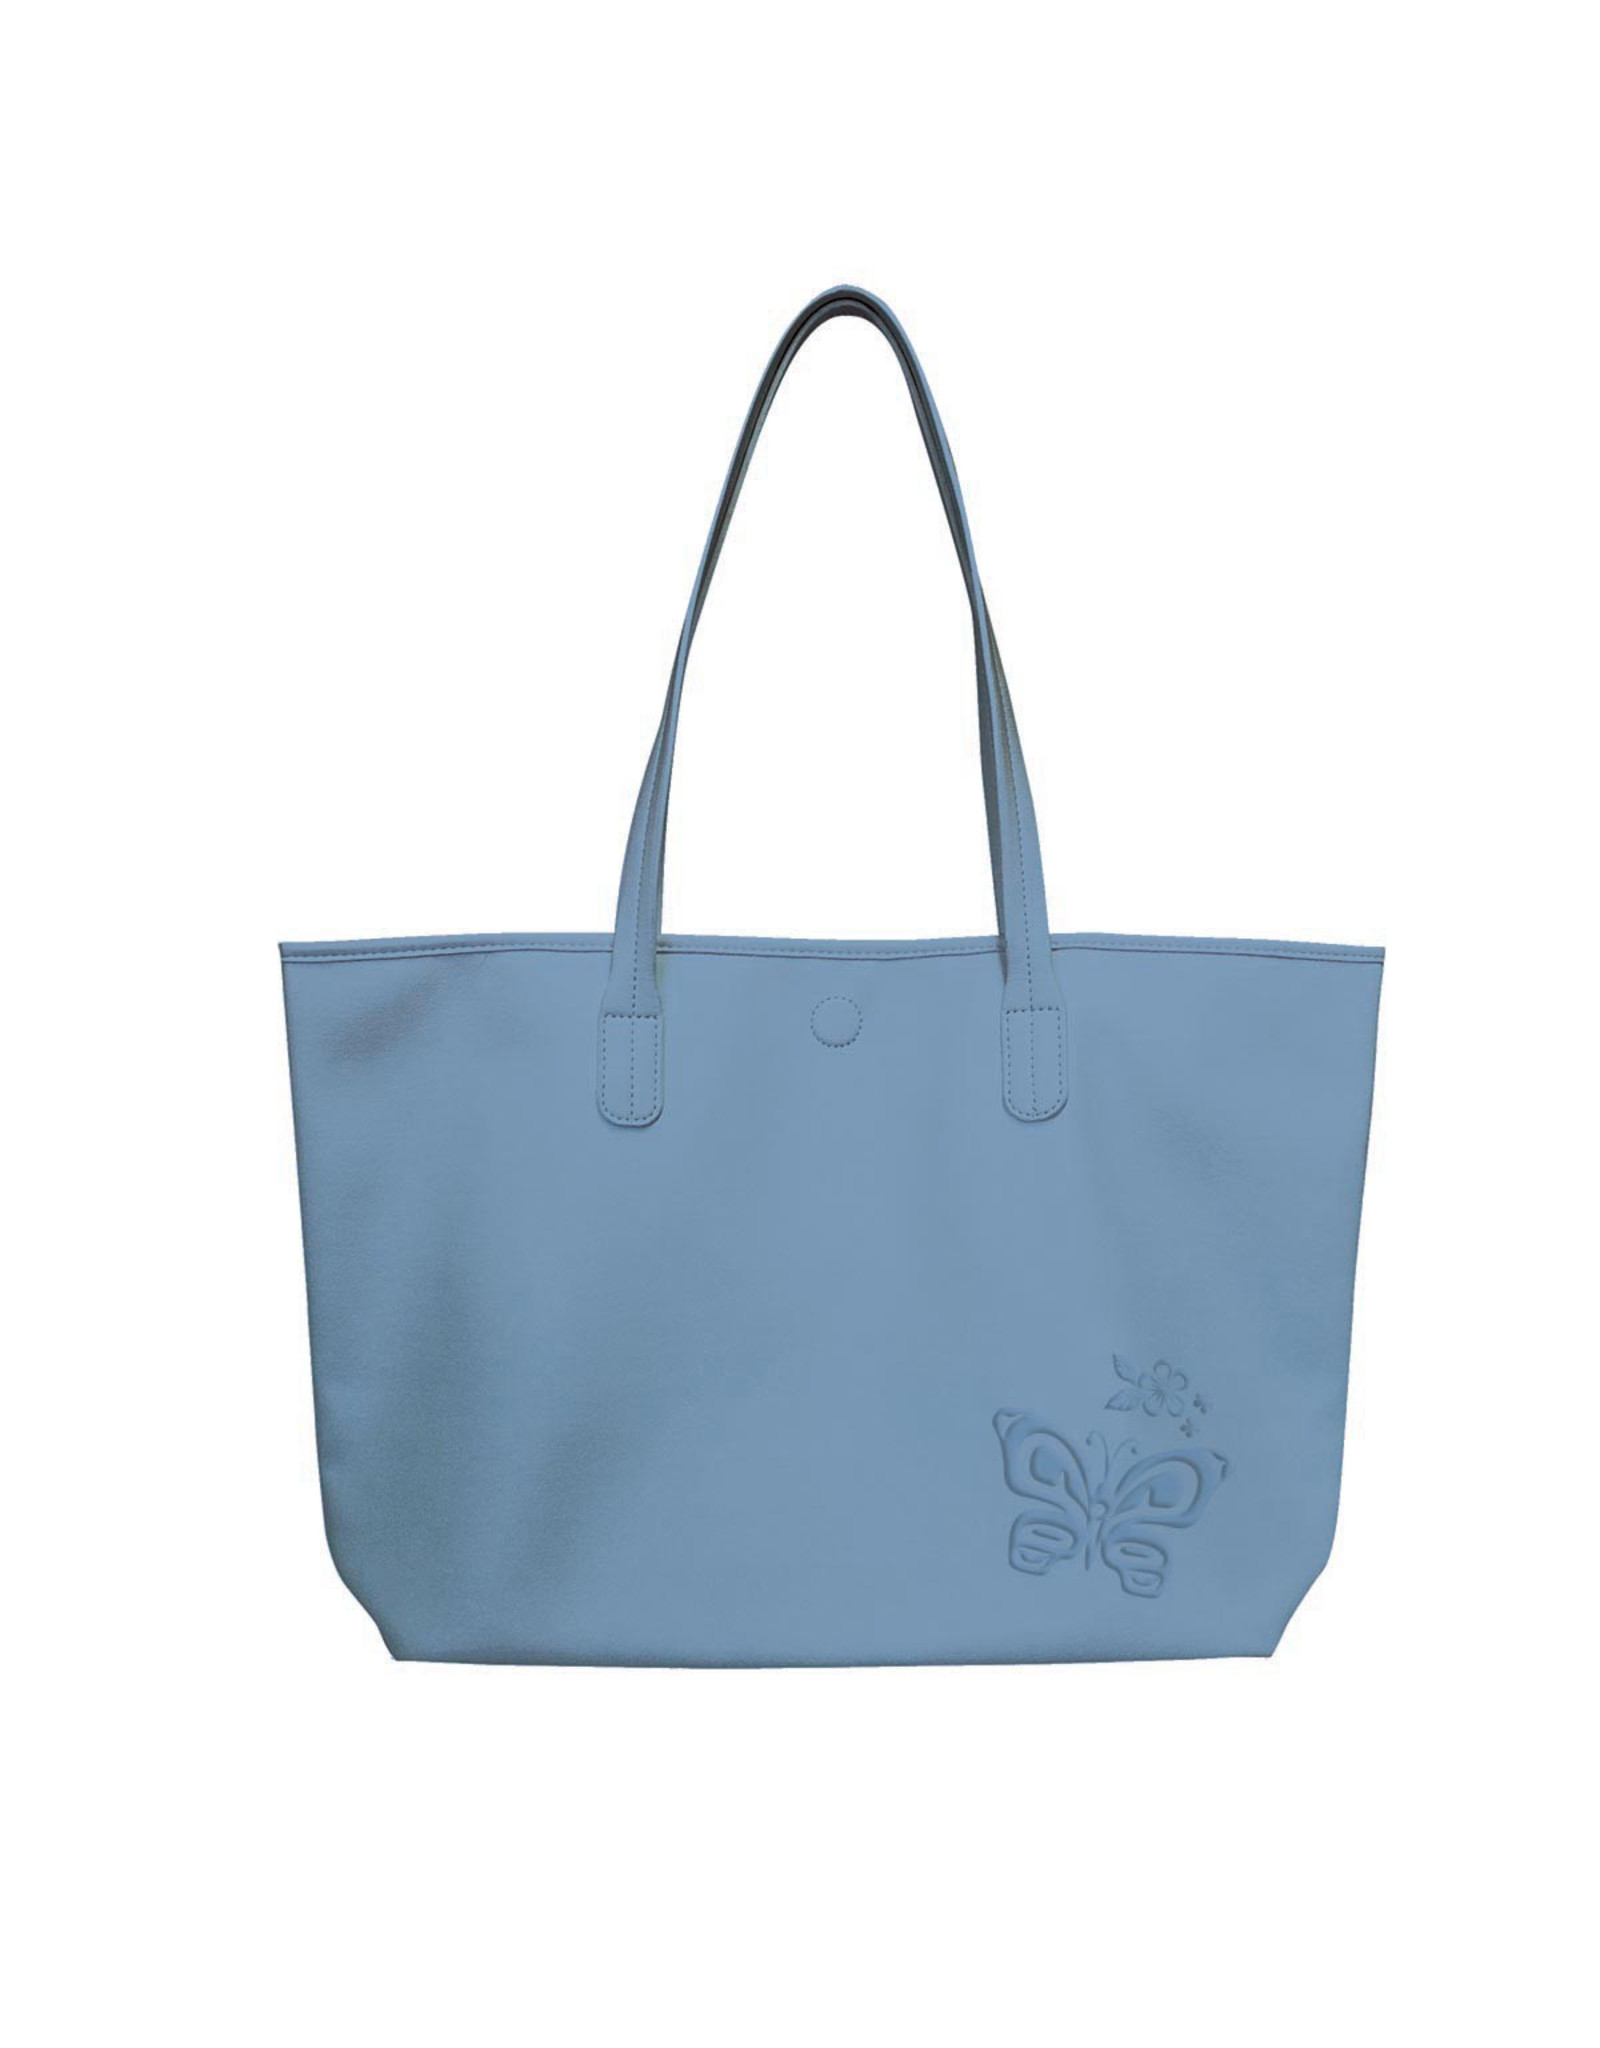 Reversible tote bag - Butterfly and Wild Rose by Justien Seona Wood